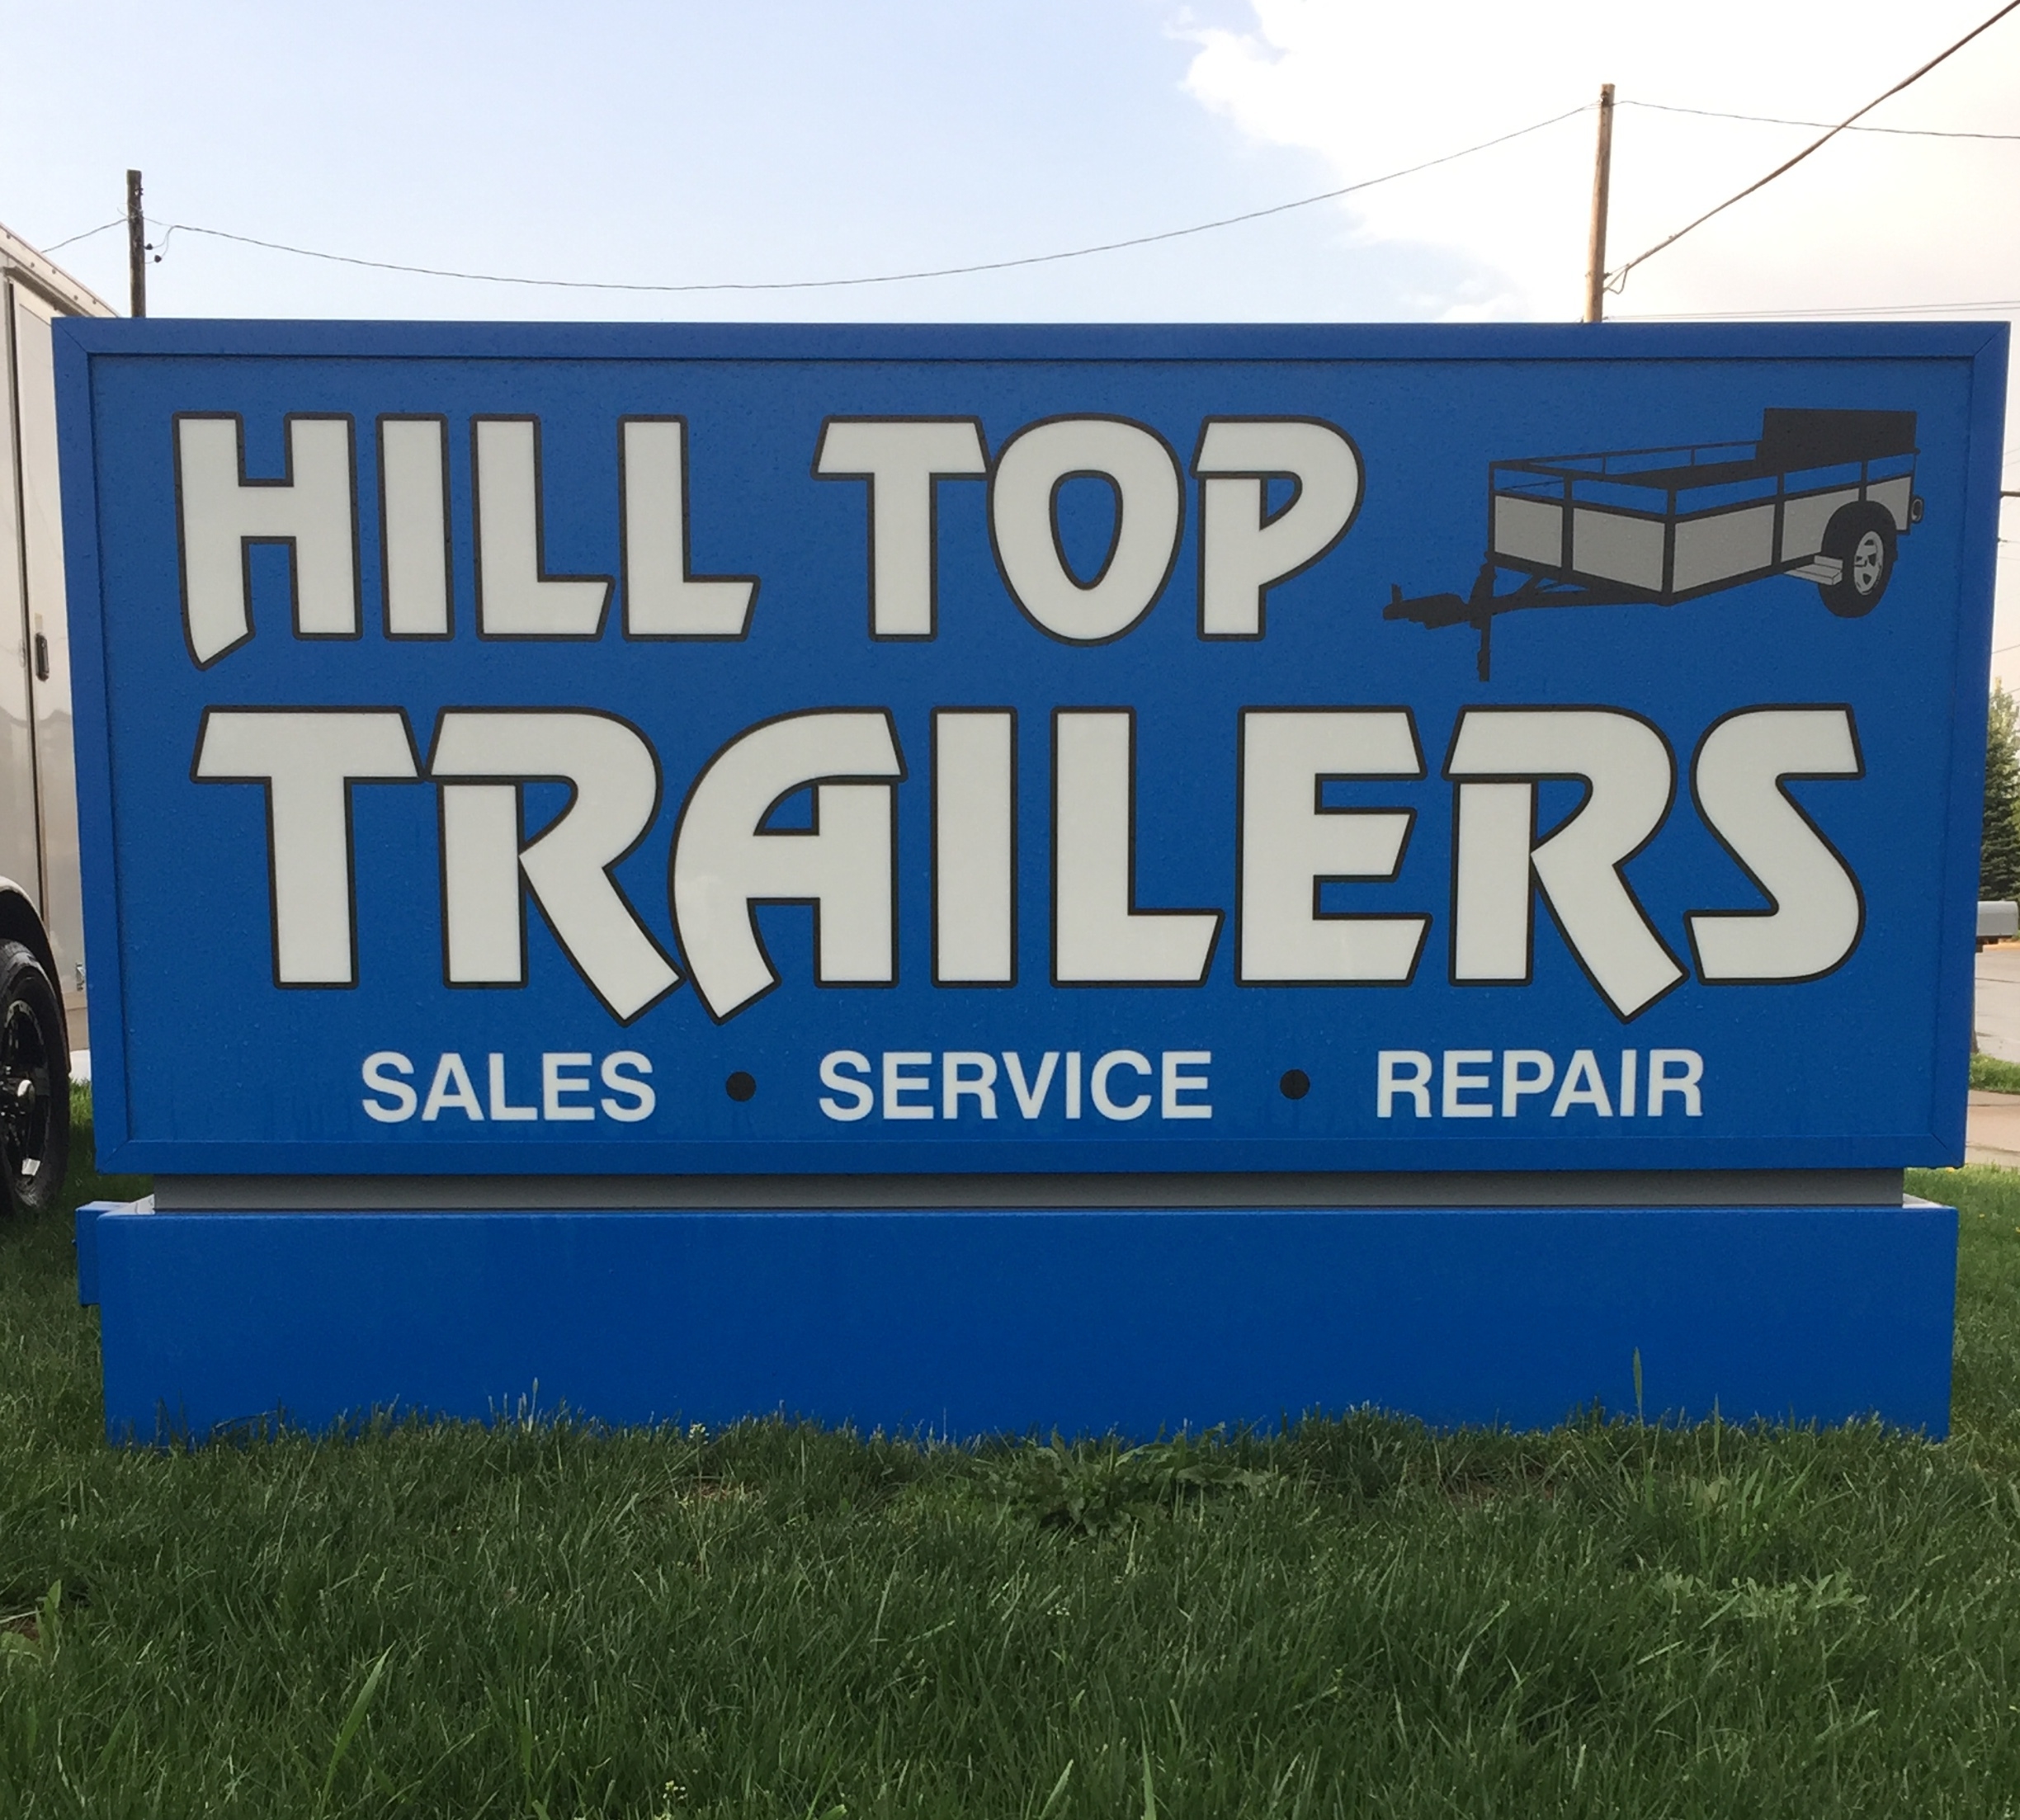 HILL TOP TRAILER SALES